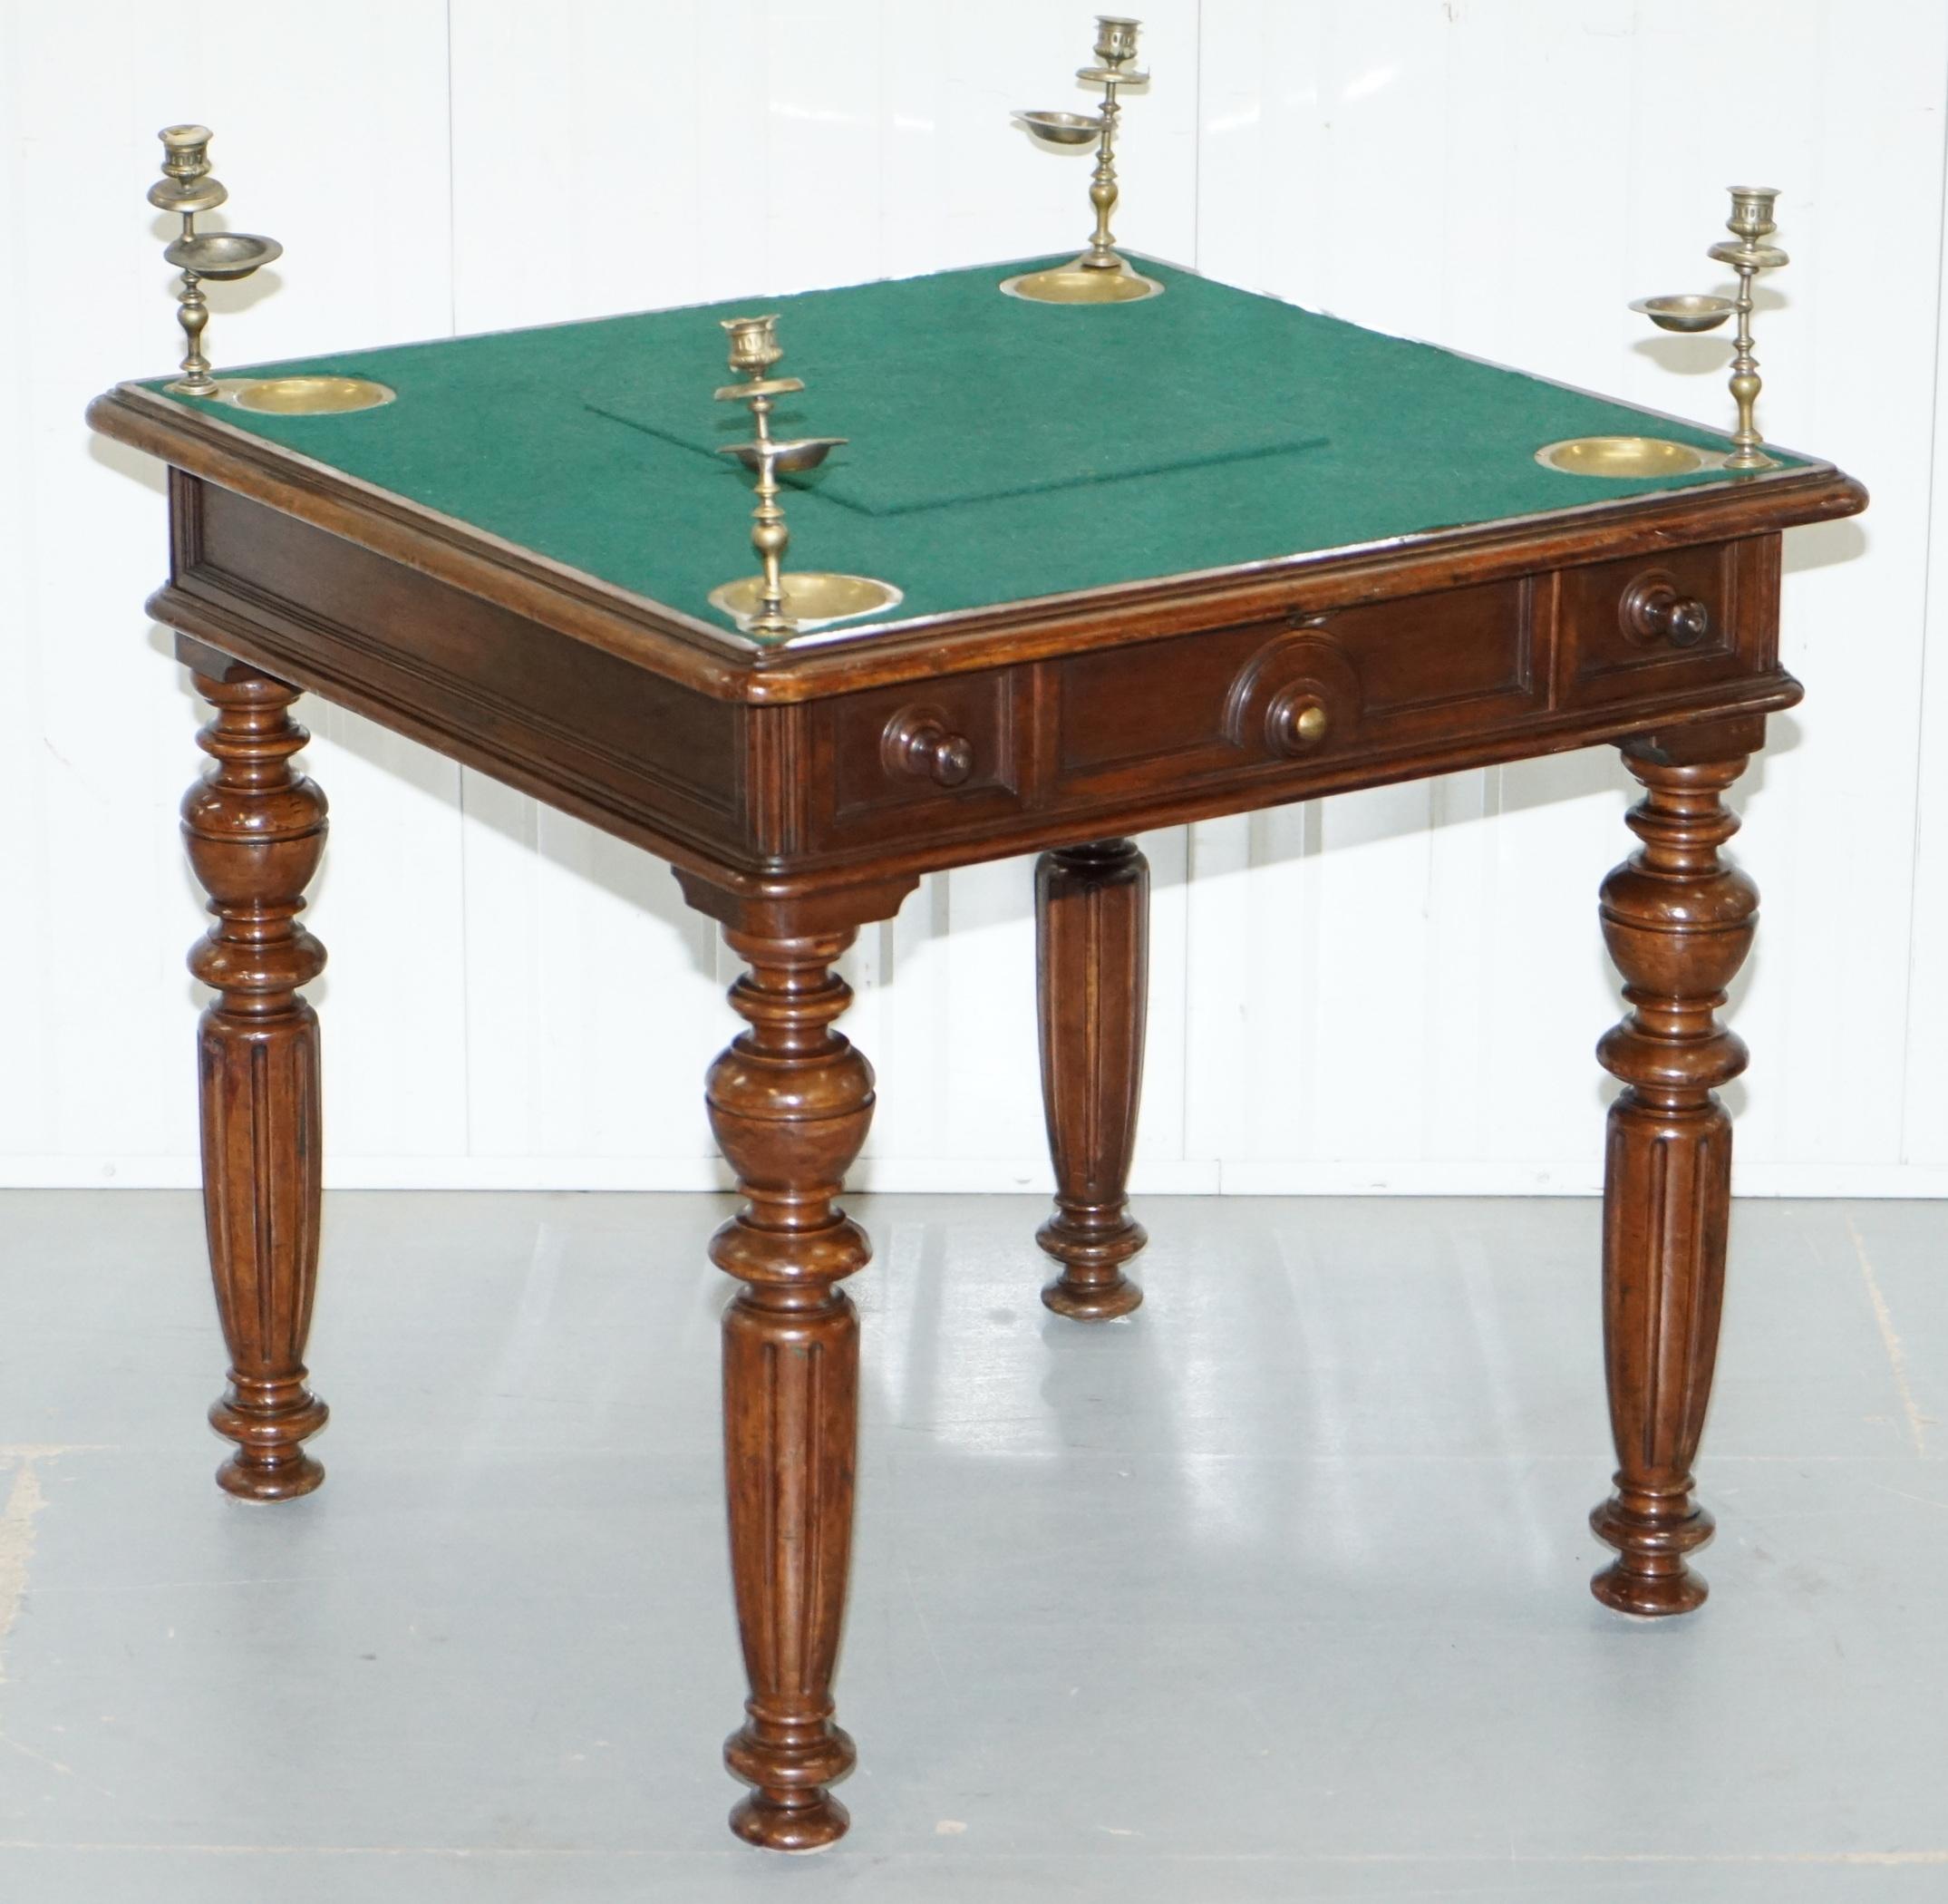 We are delighted to offer for sale this stunning and very rare circa 1840 early Victorian English Oak games table

This table is a bit of mystery, it has a square drop section in the middle which I assume is for making all the chips slide to the